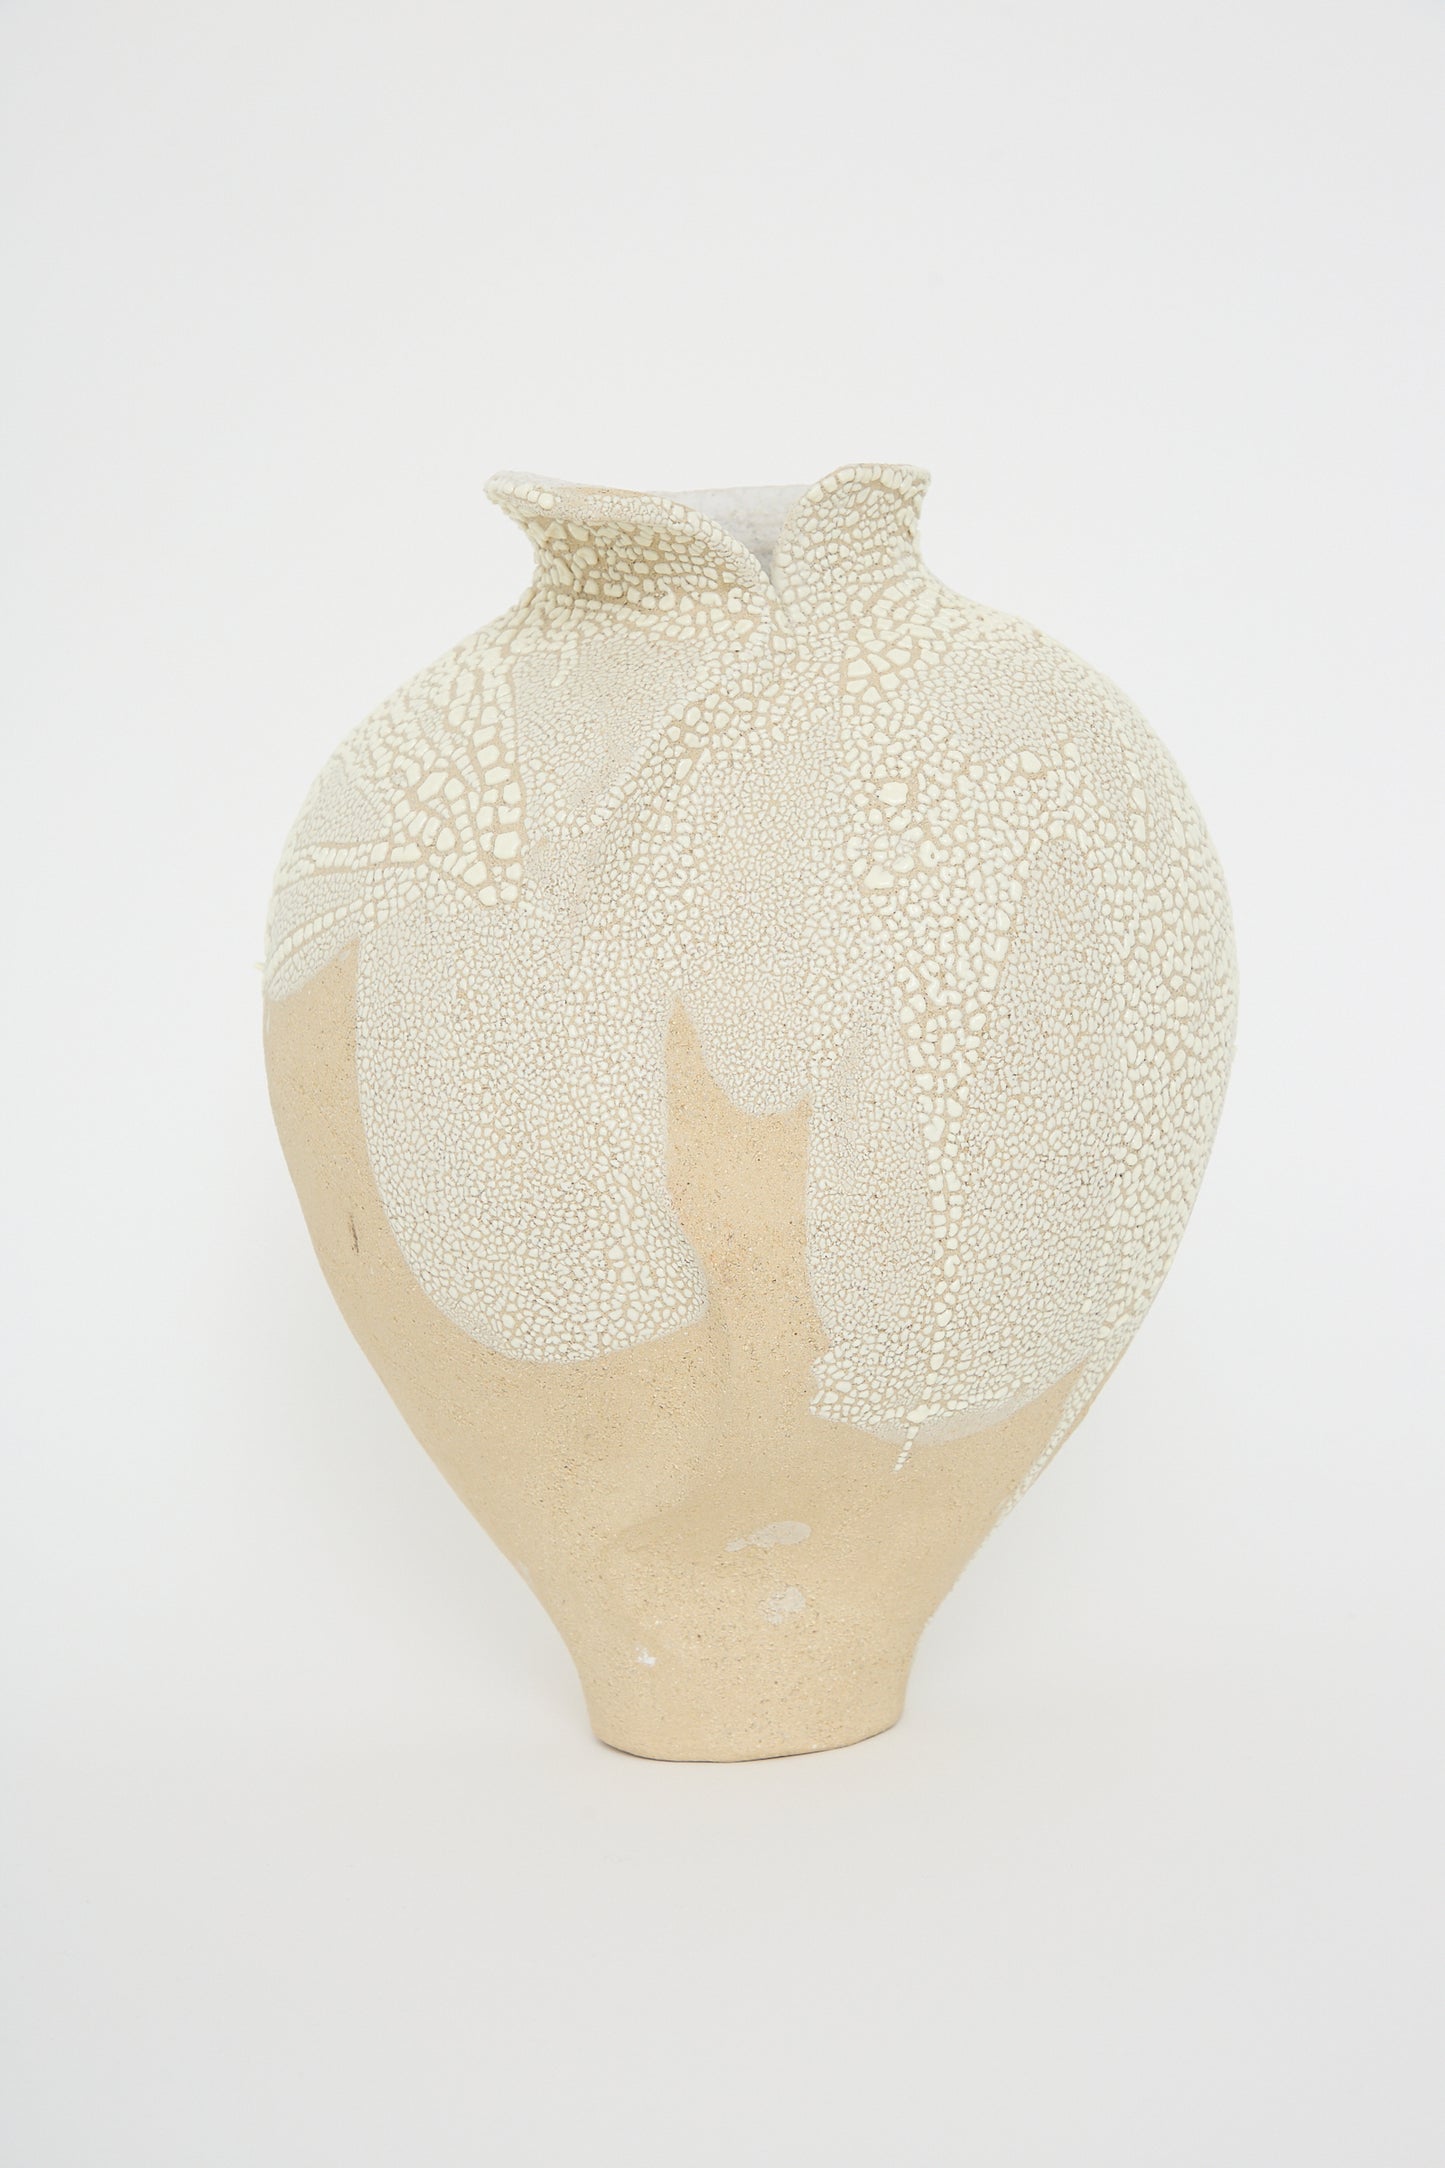 Vessel No. 741 in White Sculpture Clay with intricate lace-like patterns on a plain background by Lost Quarry.